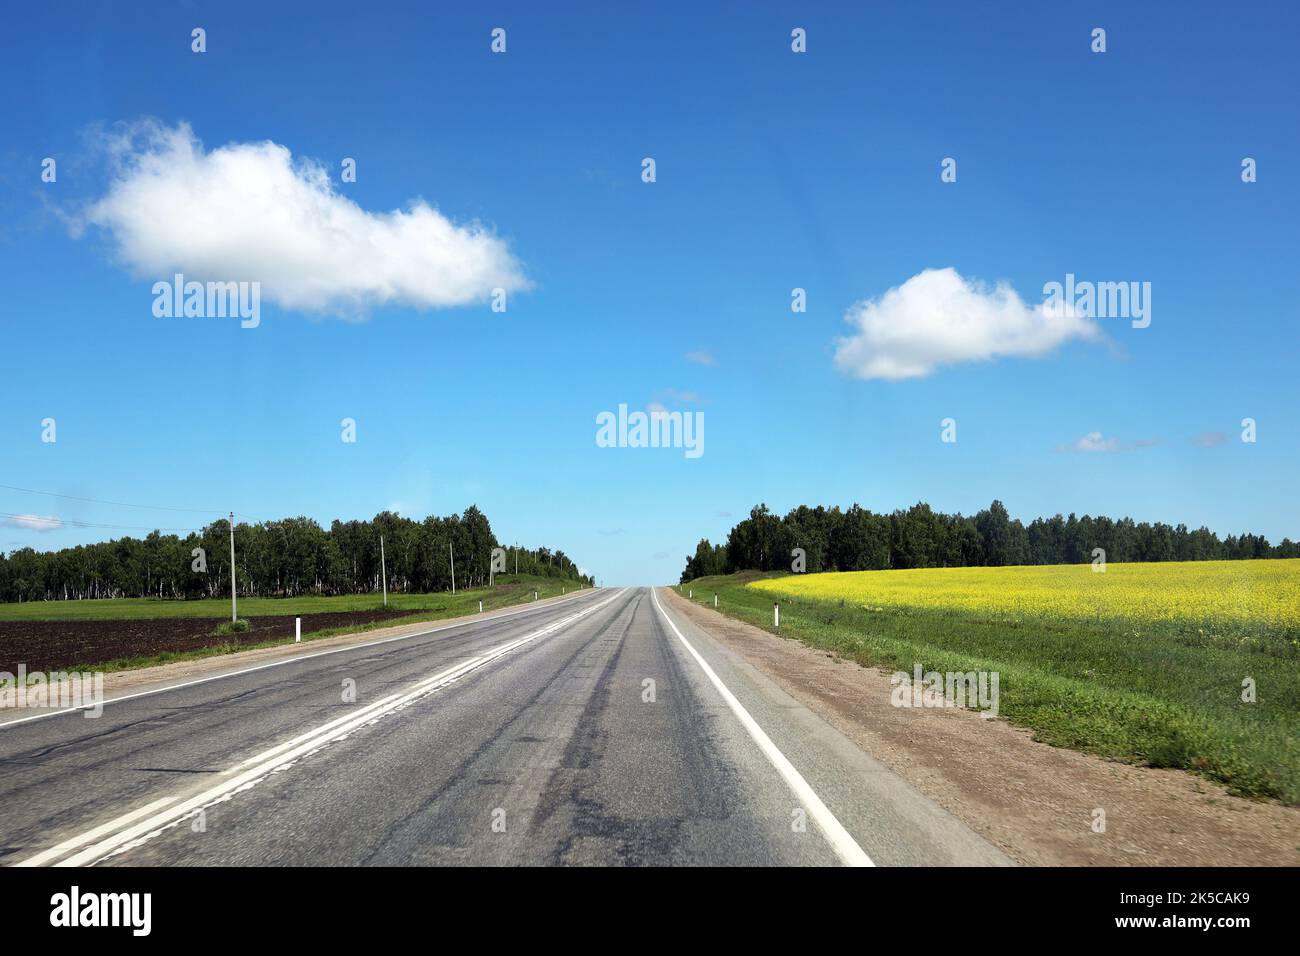 Asphalt road going over the horizon on a sunny day Stock Photo